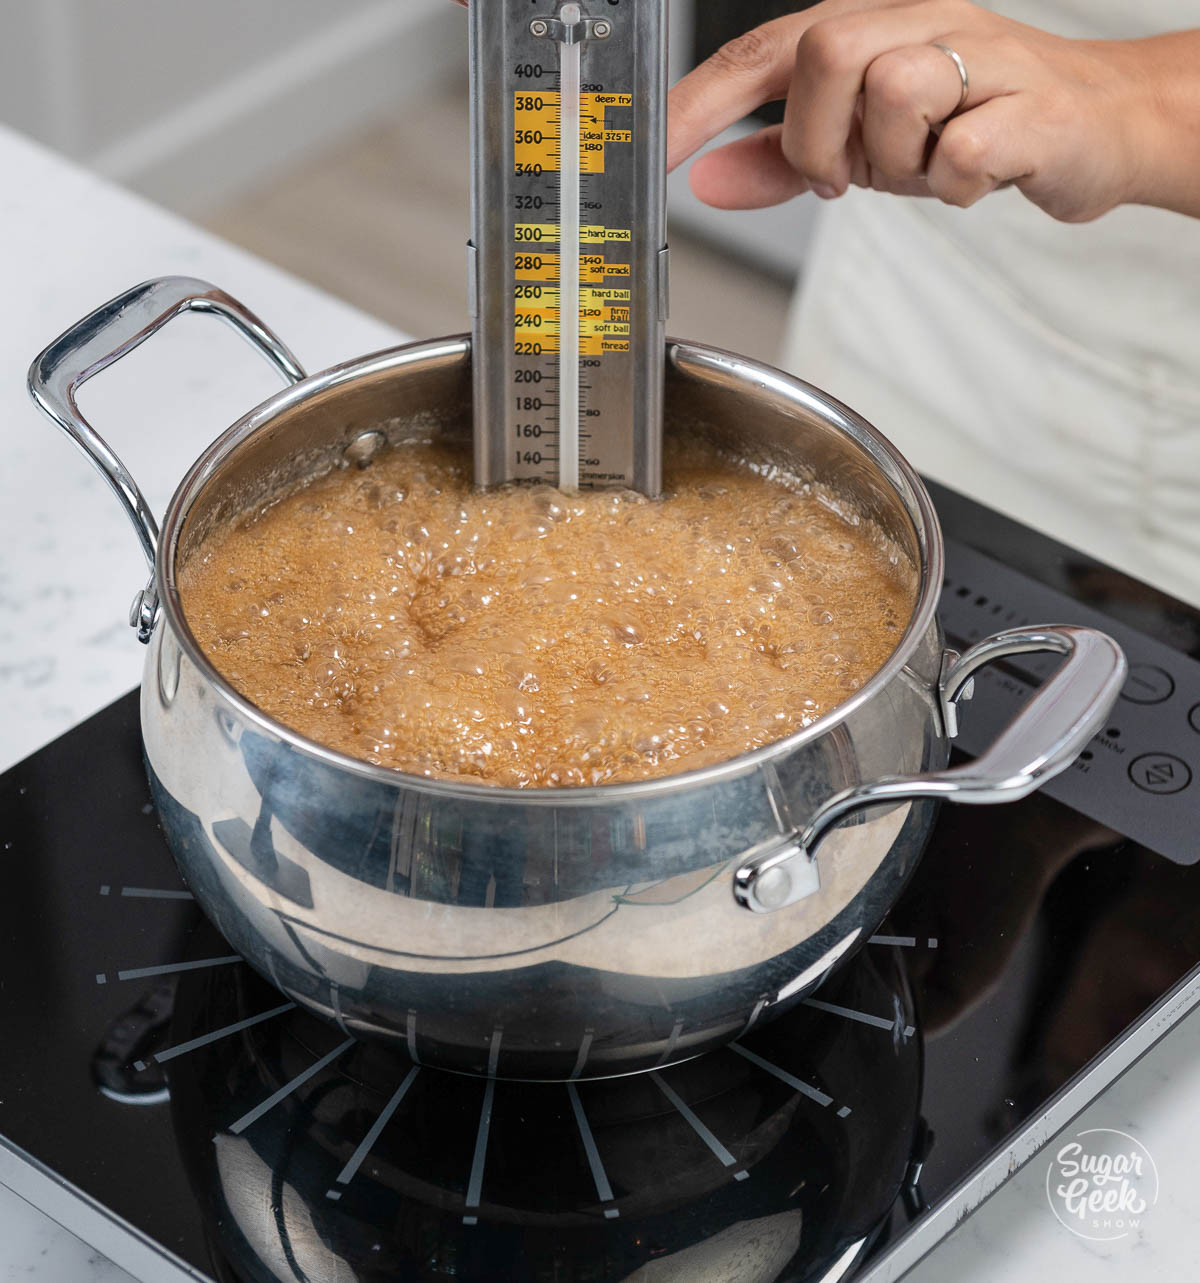 womans hand placing a candy thermometer into a saucepan of caramel cooking